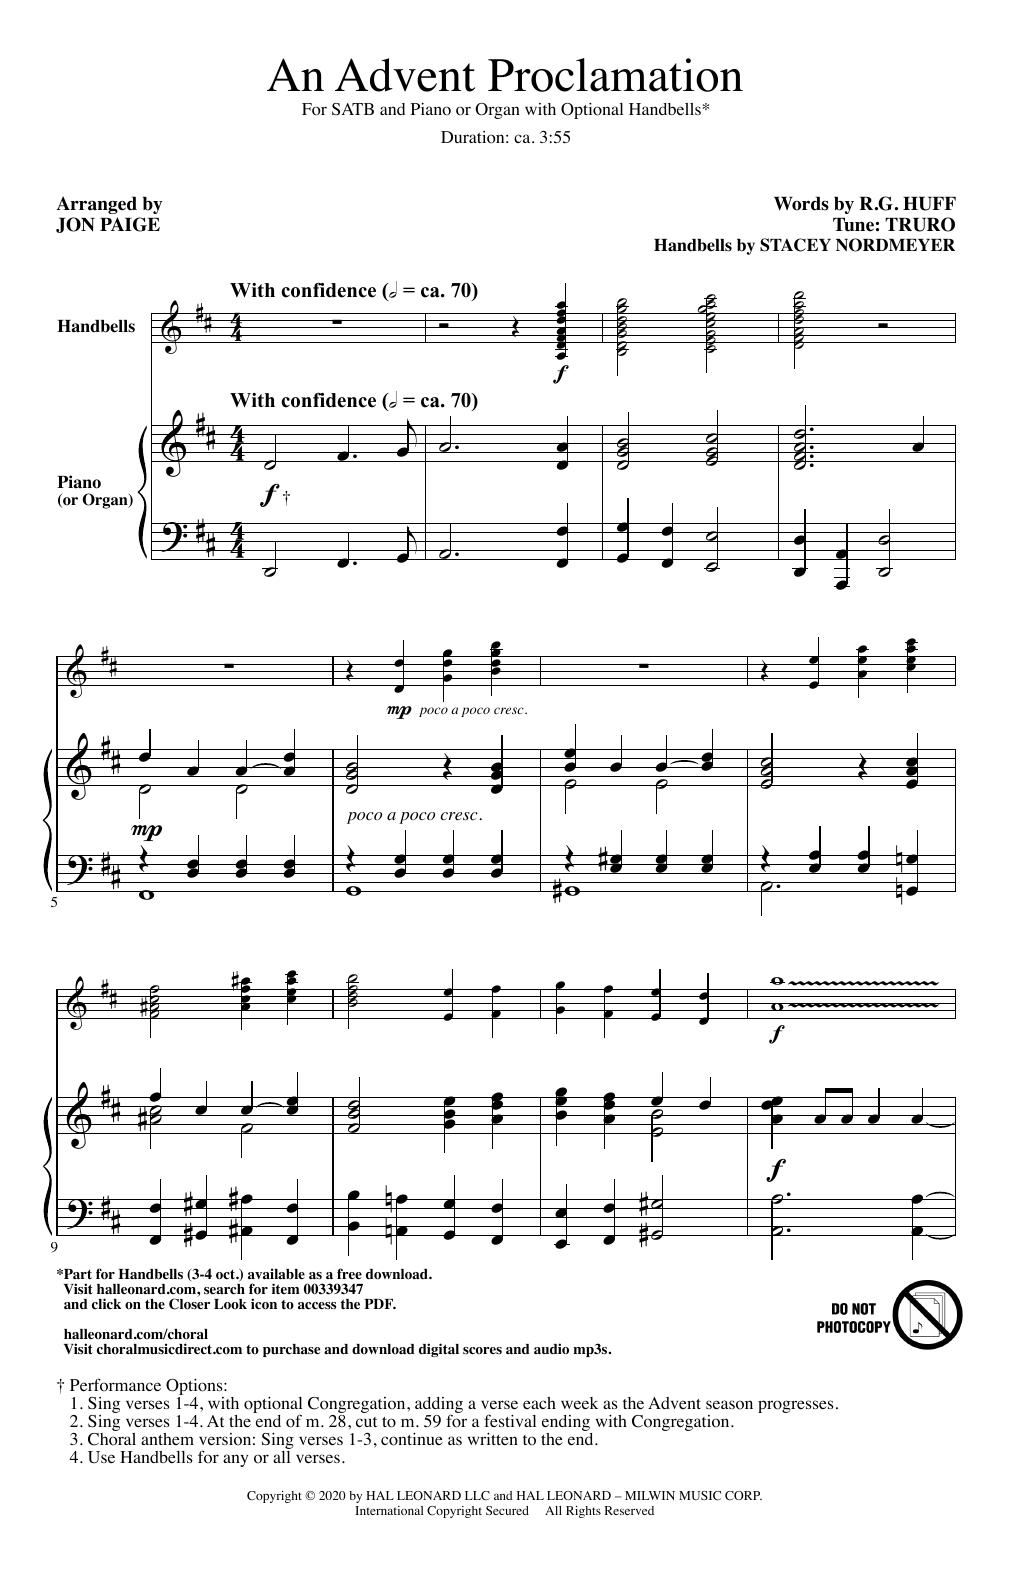 Download R.G. Huff An Advent Proclamation (arr. Jon Paige) Sheet Music